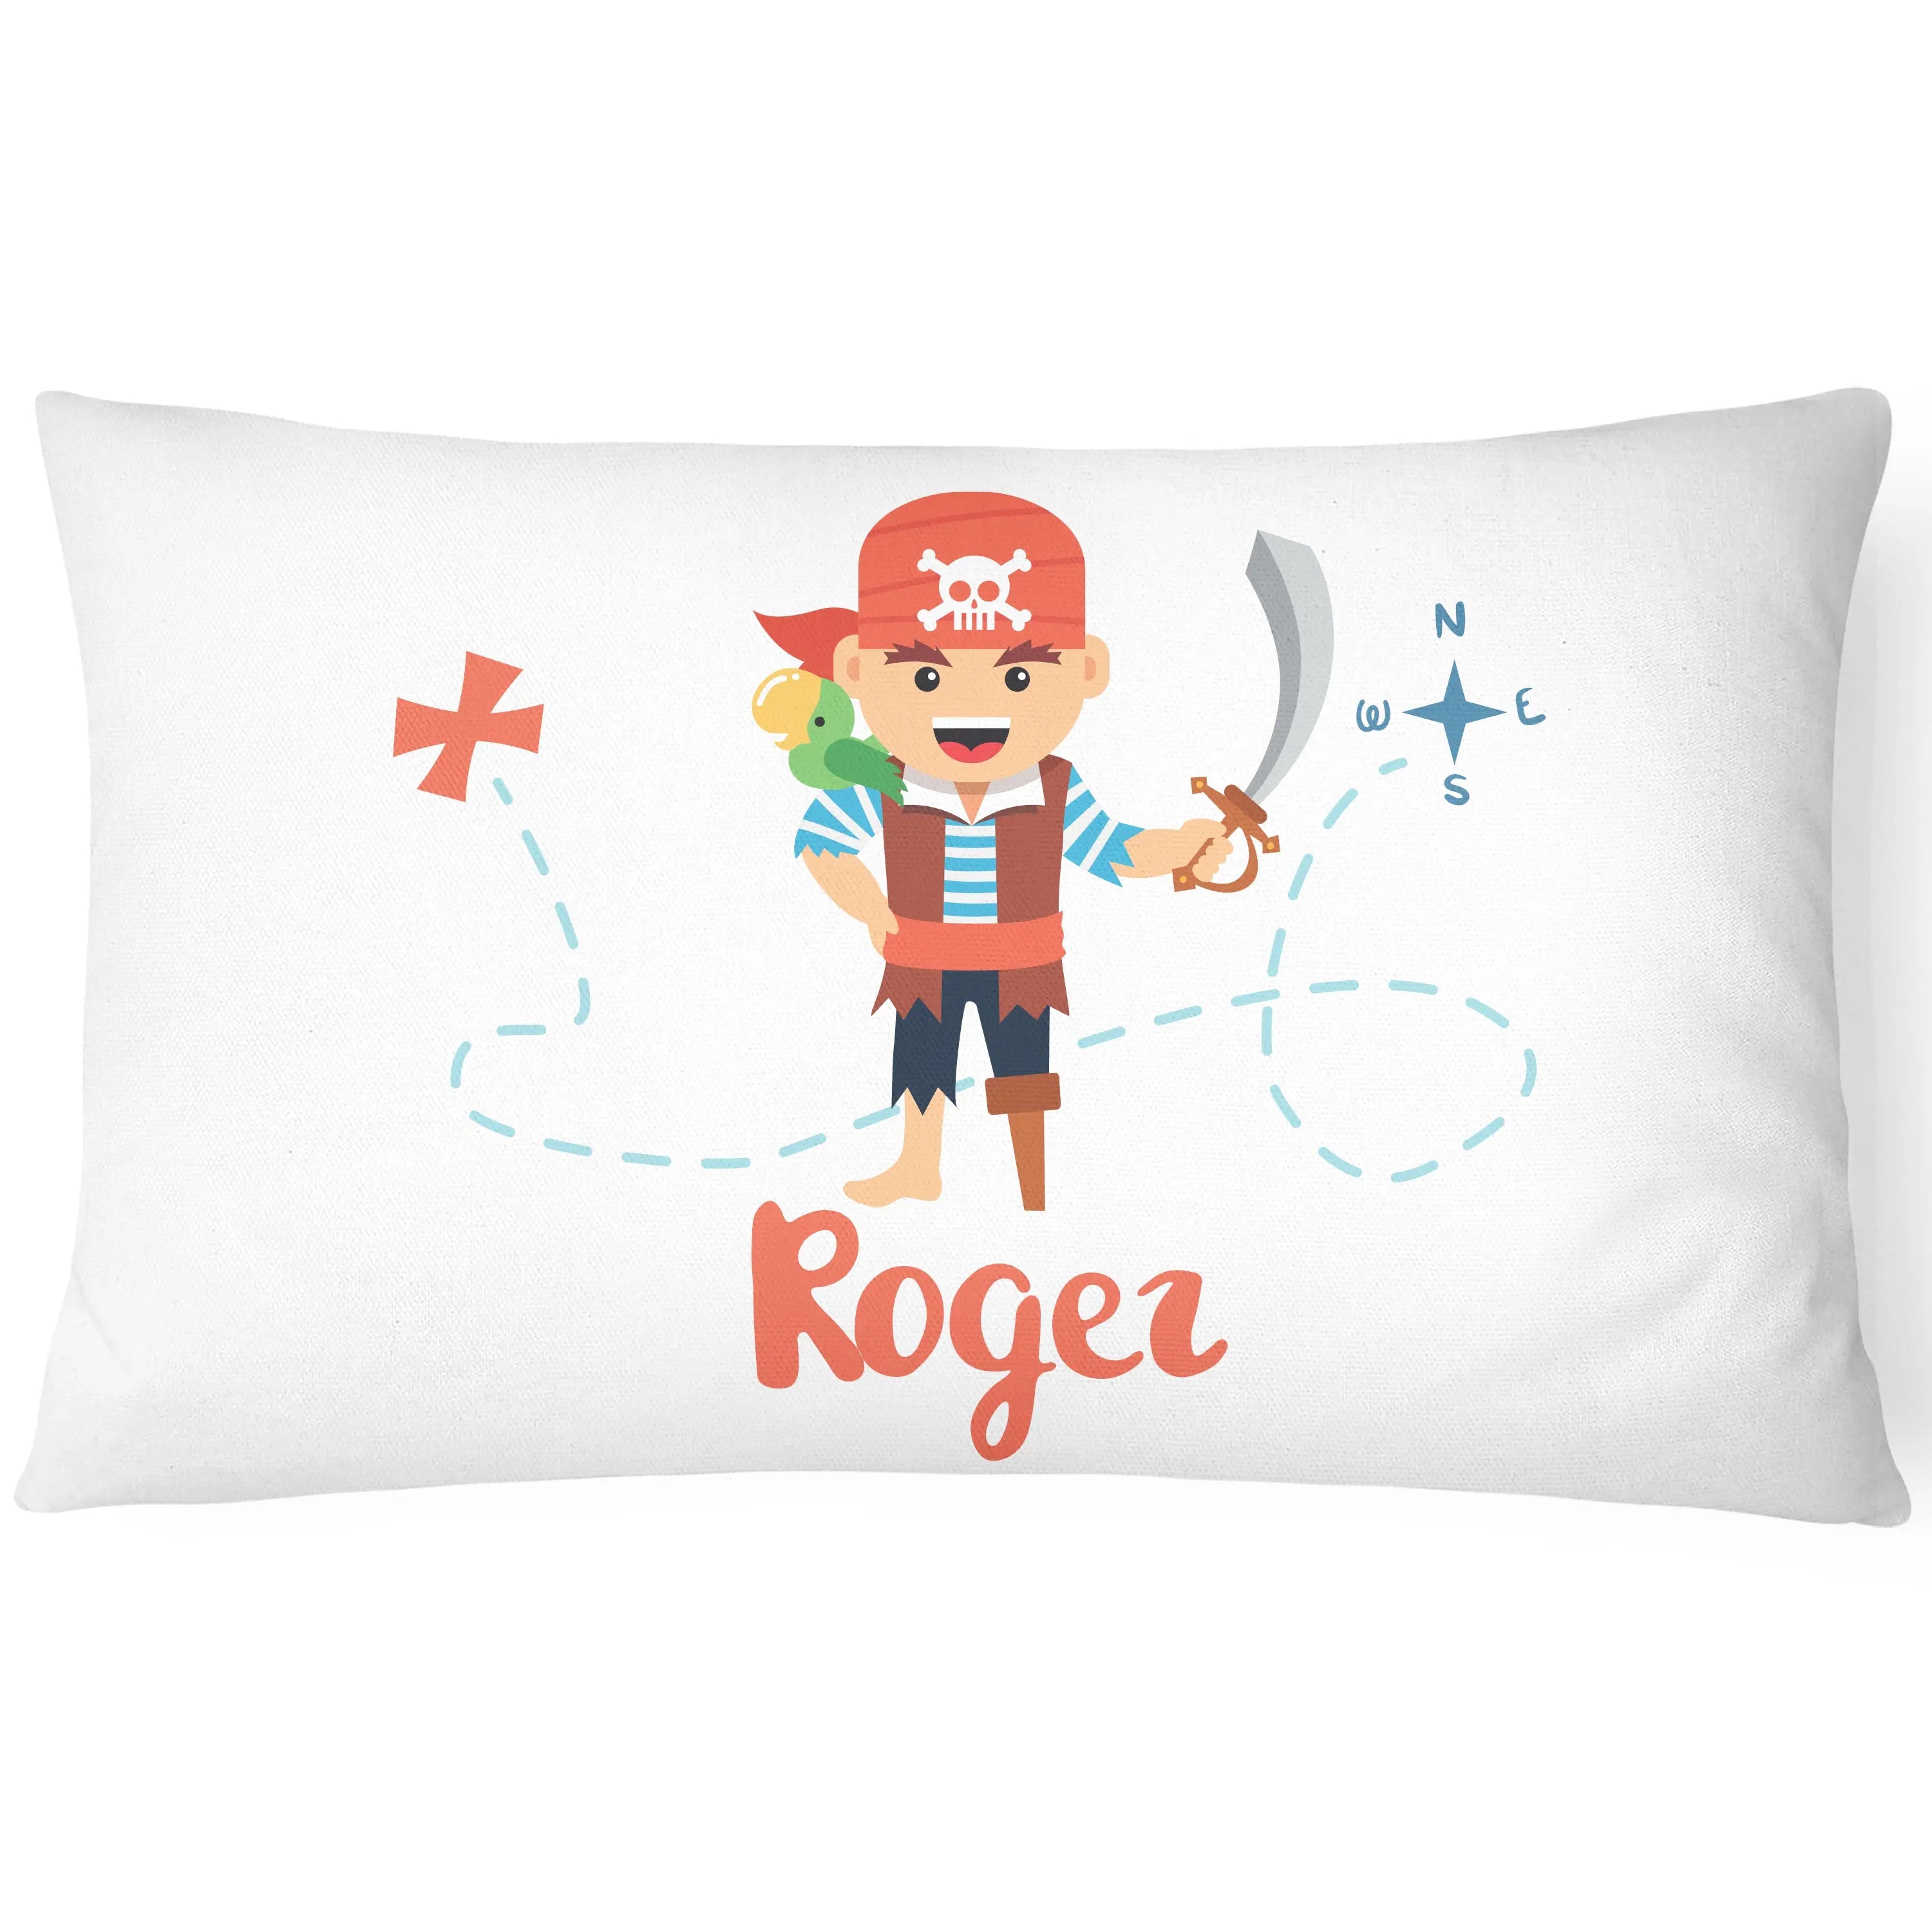 Pirate Children's Pillowcase | Personalise with any Name  | Premium Polyester - CushionPop